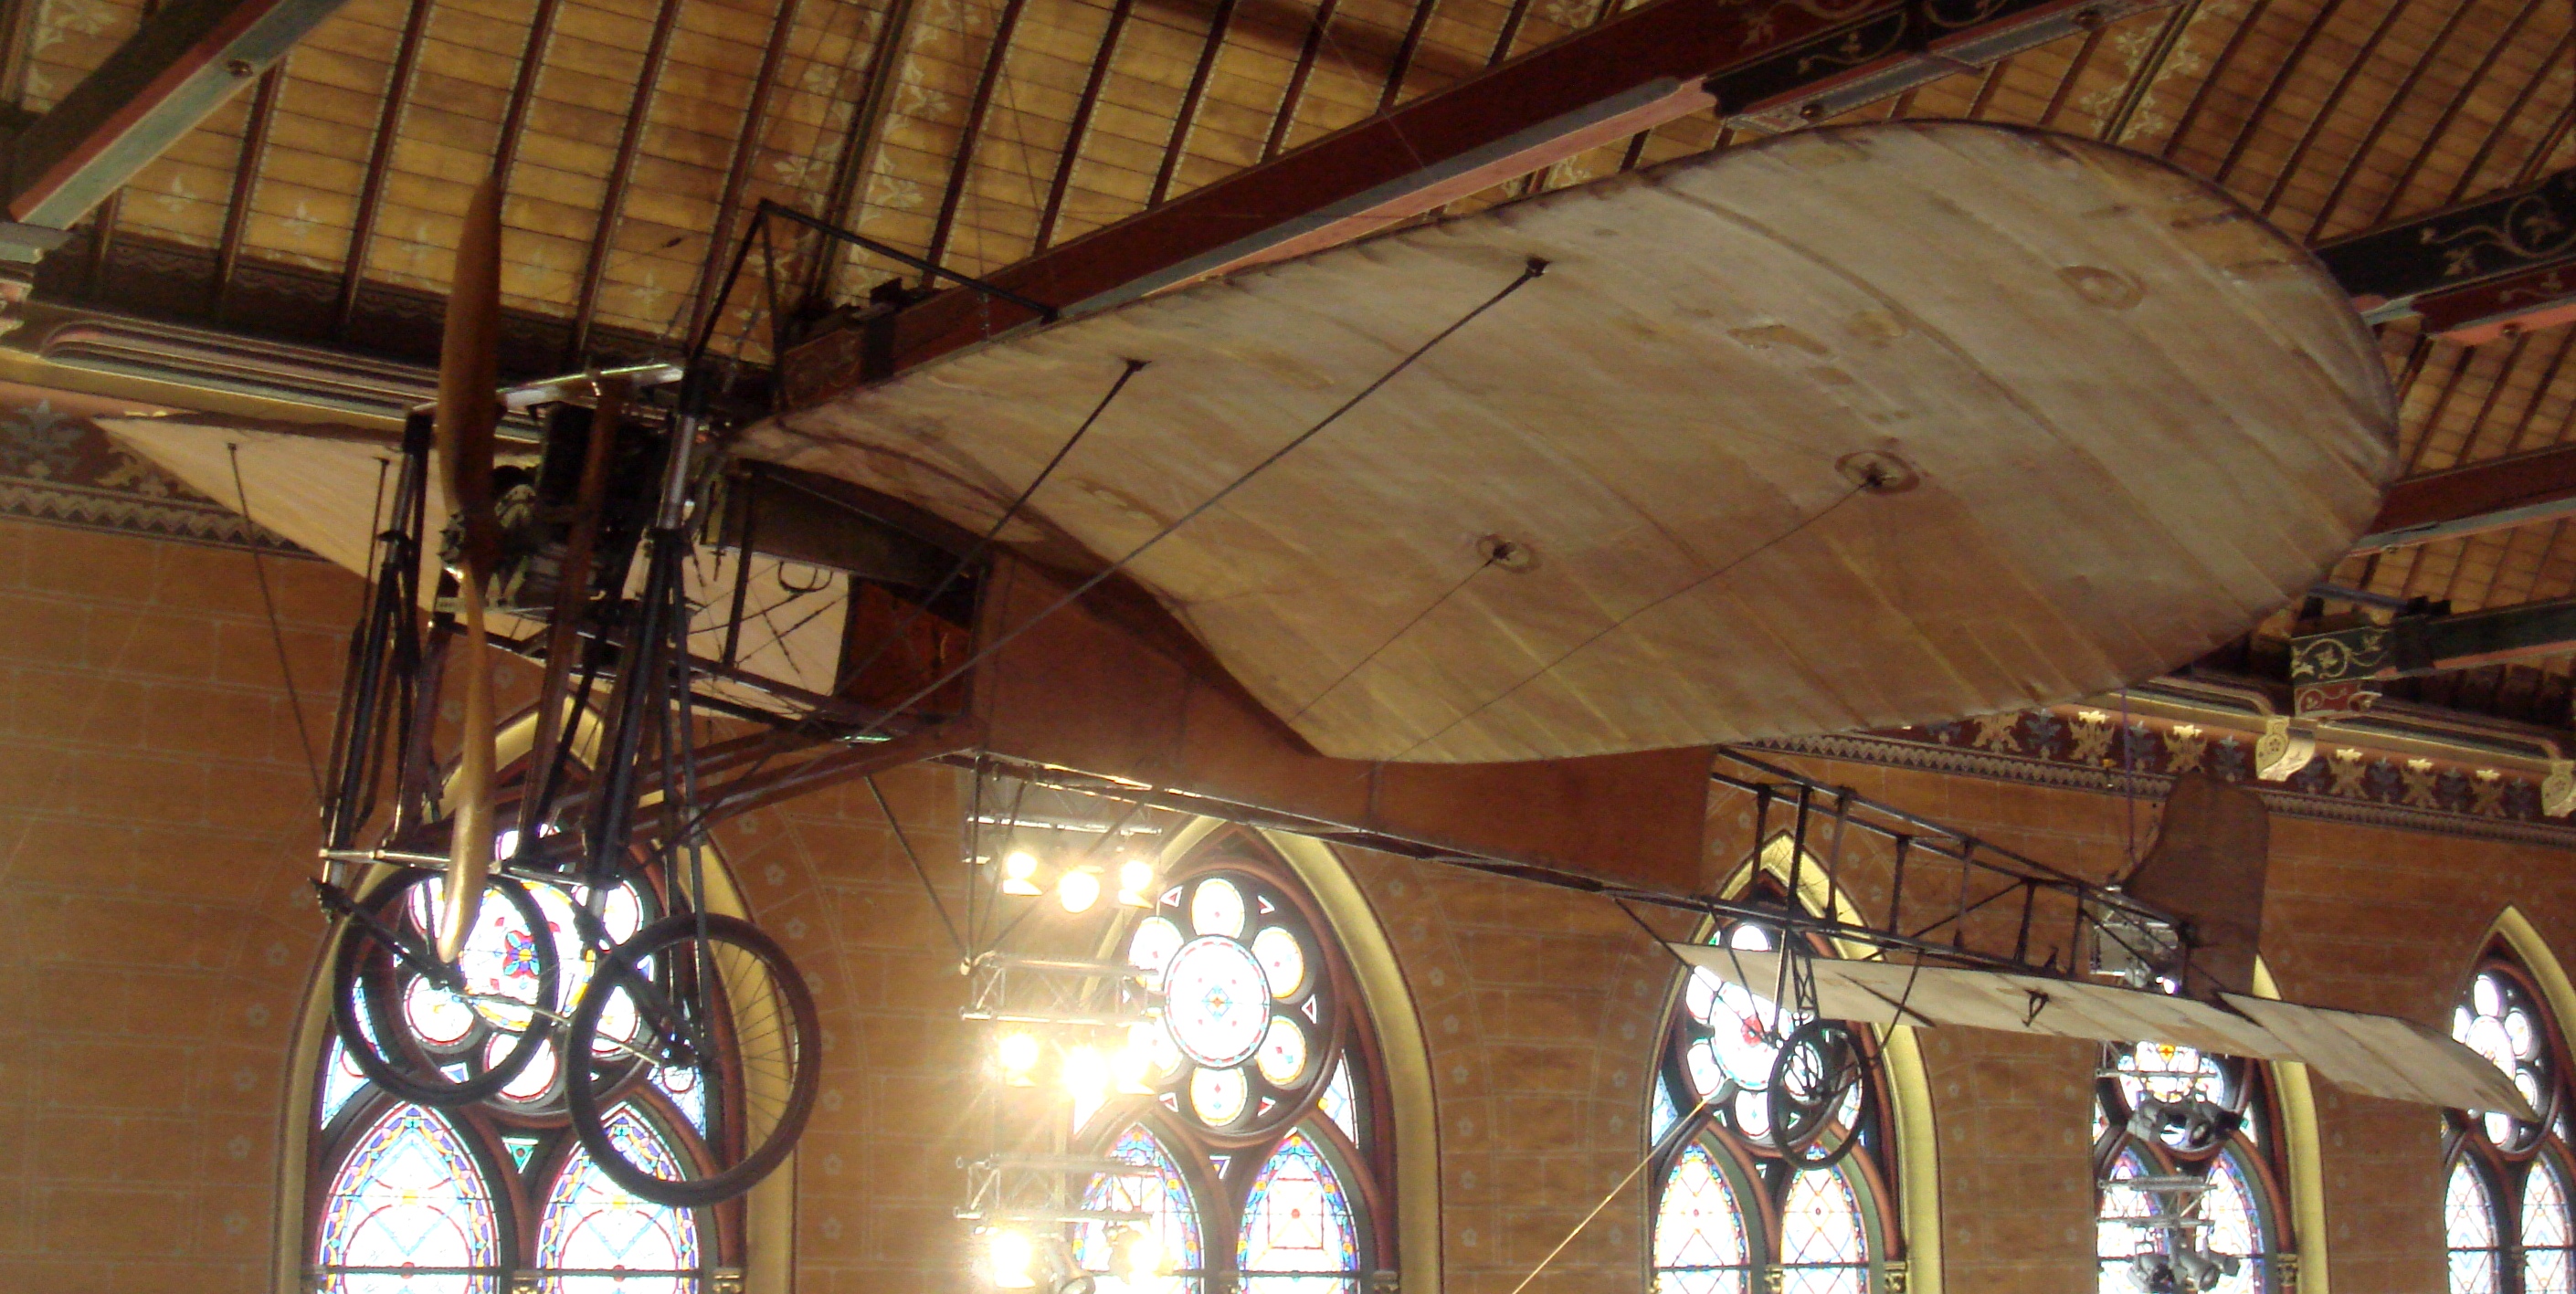 Bleriot XI plane (1909). This is the plane on which Bleriot crossed the Channel. Photographed at the Musee des Arts et Metiers on August 31, 2008.